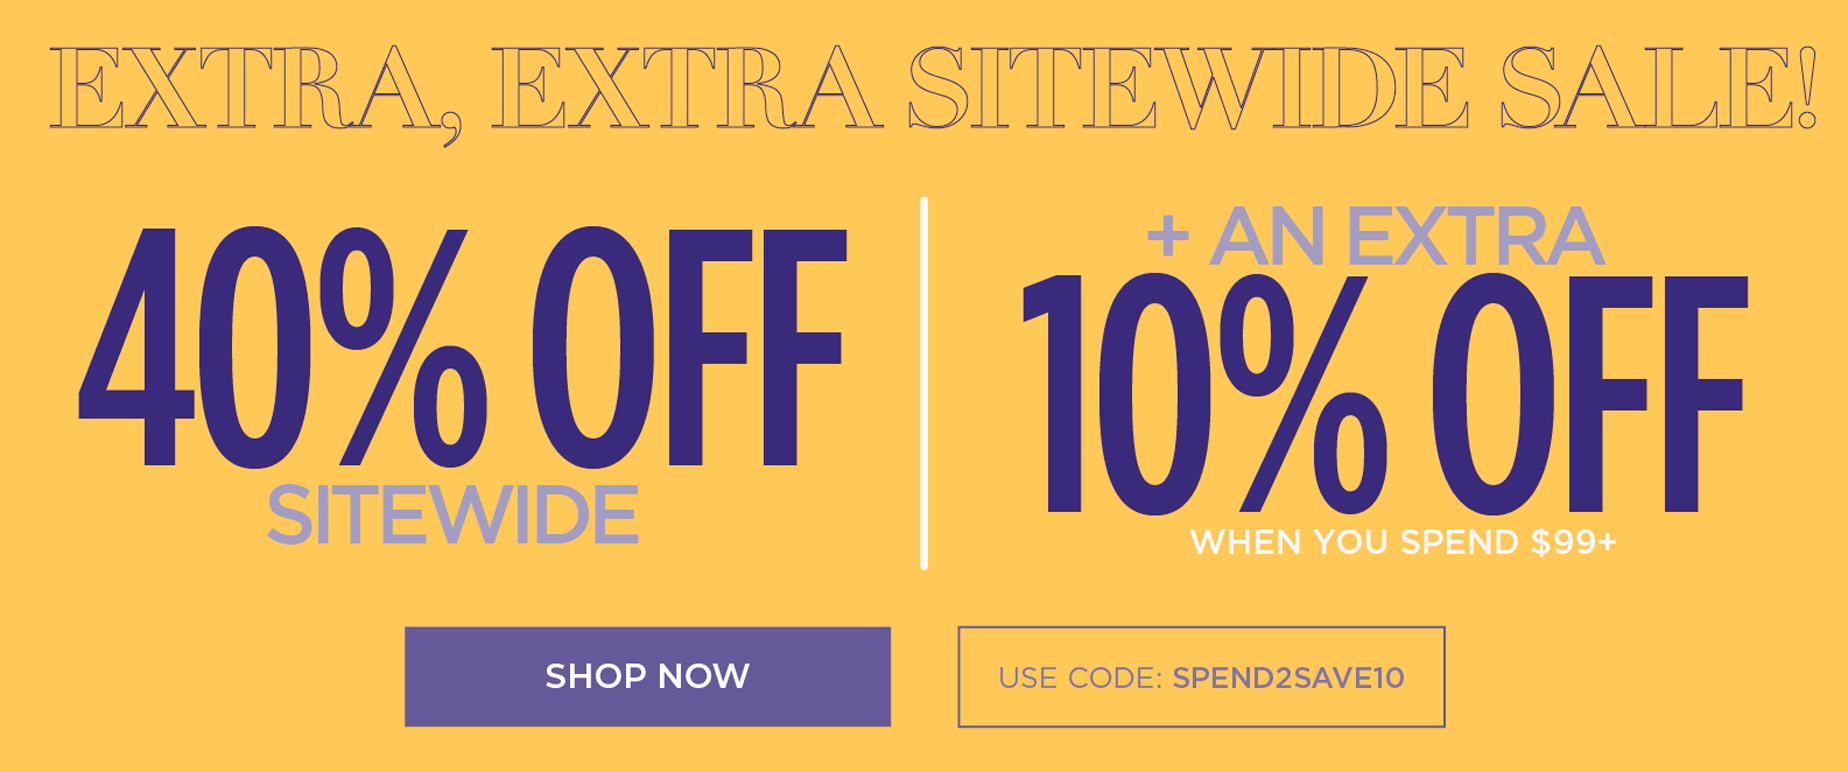 EXTRA EXTRA SITEWIDE SALE! 40% OFF SITEWIDE PLUS AN EXTRA 10% OFF when you use code: SPEND2SAVE10